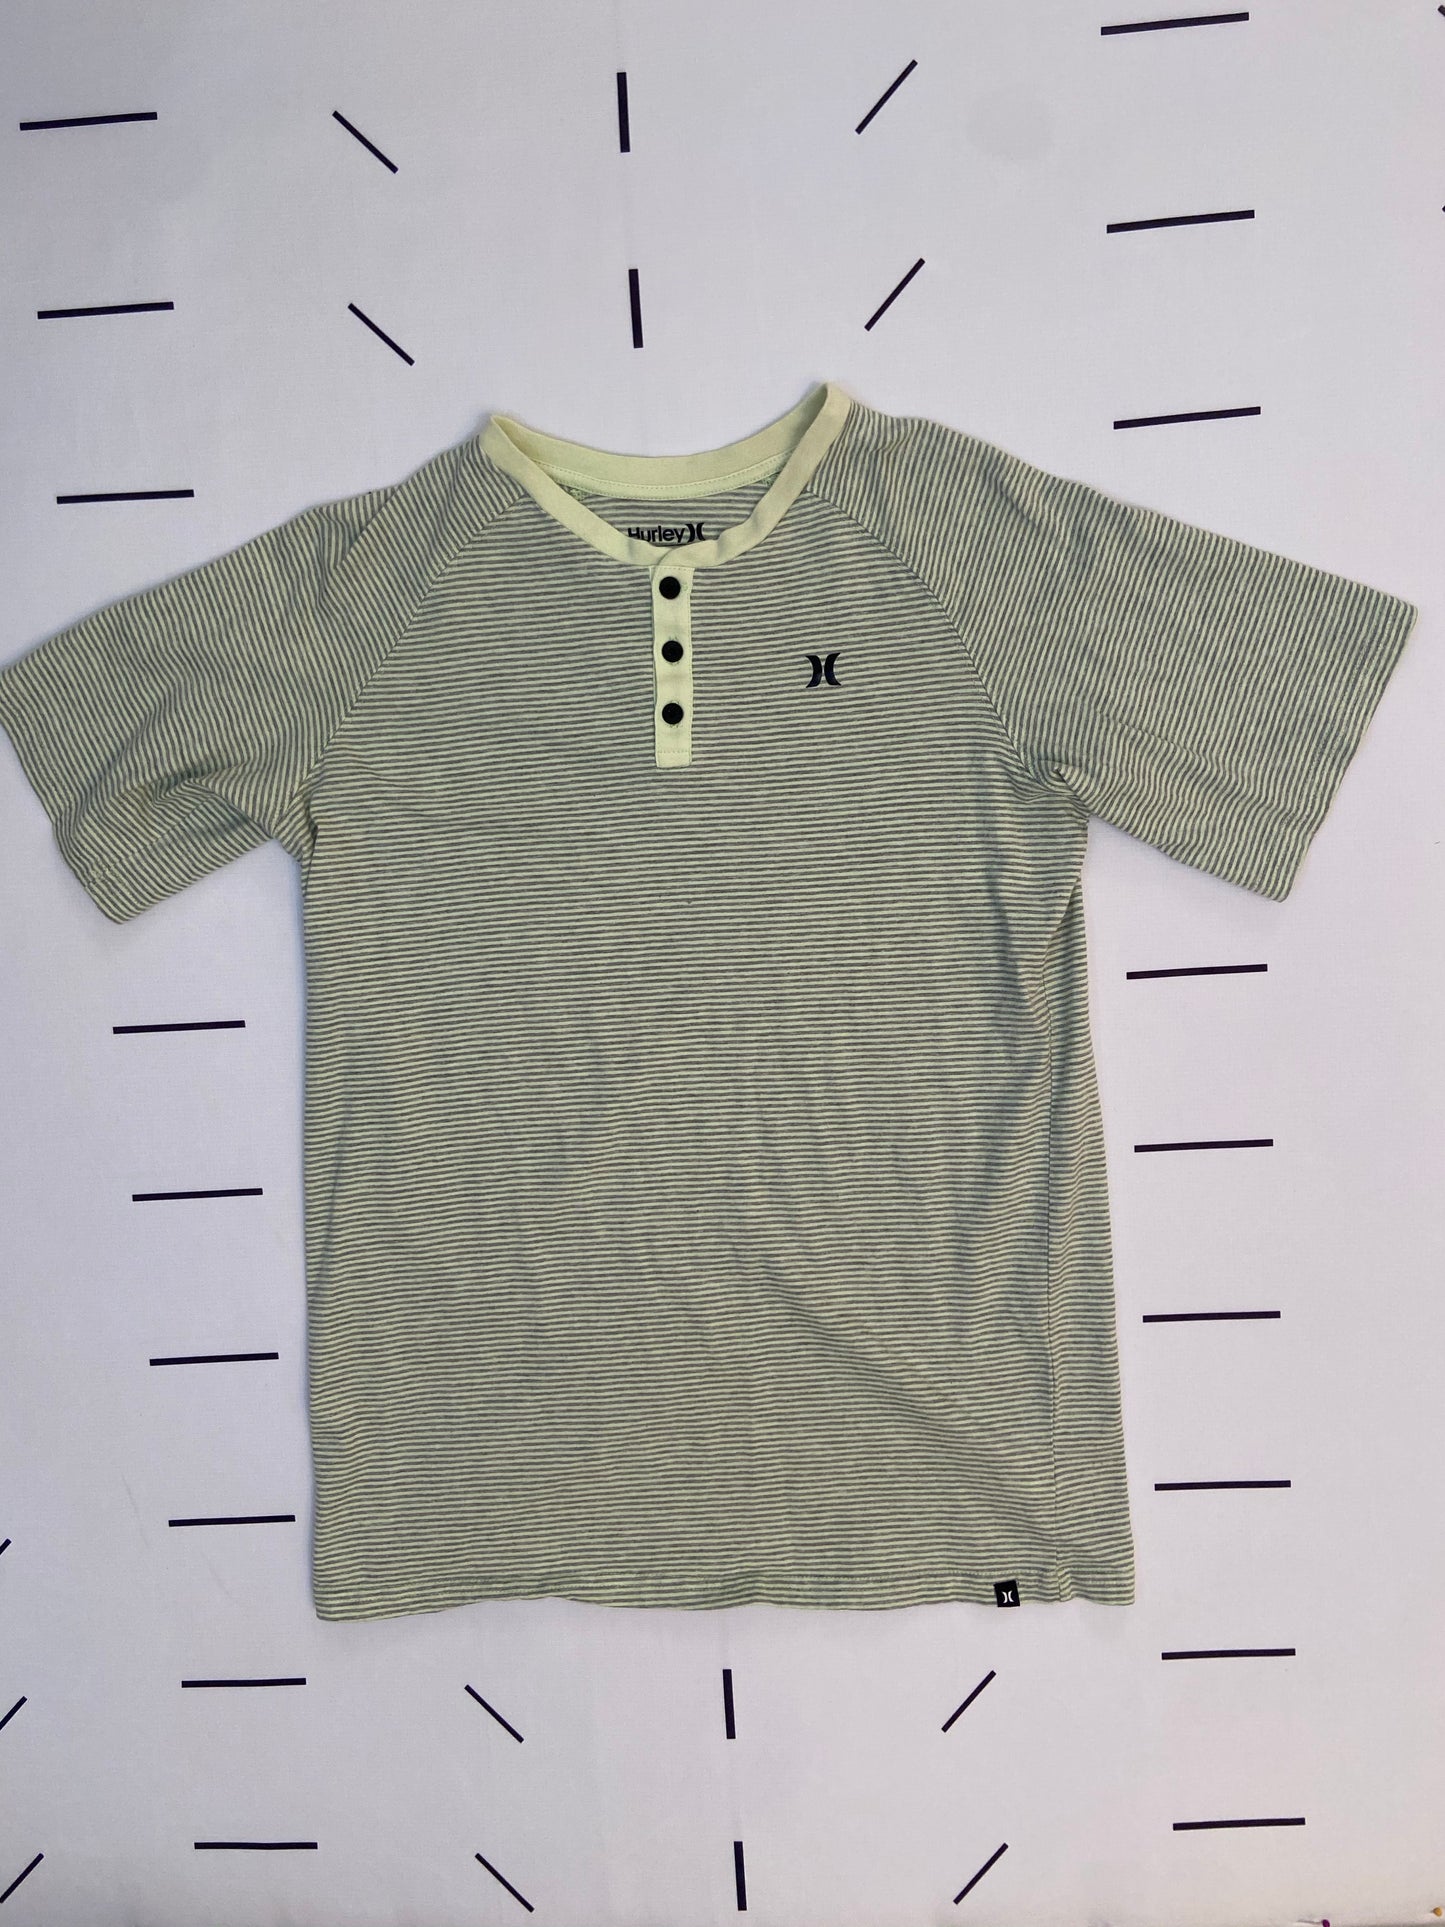 Pastel Yellow Half Button up Tee- Youth XL